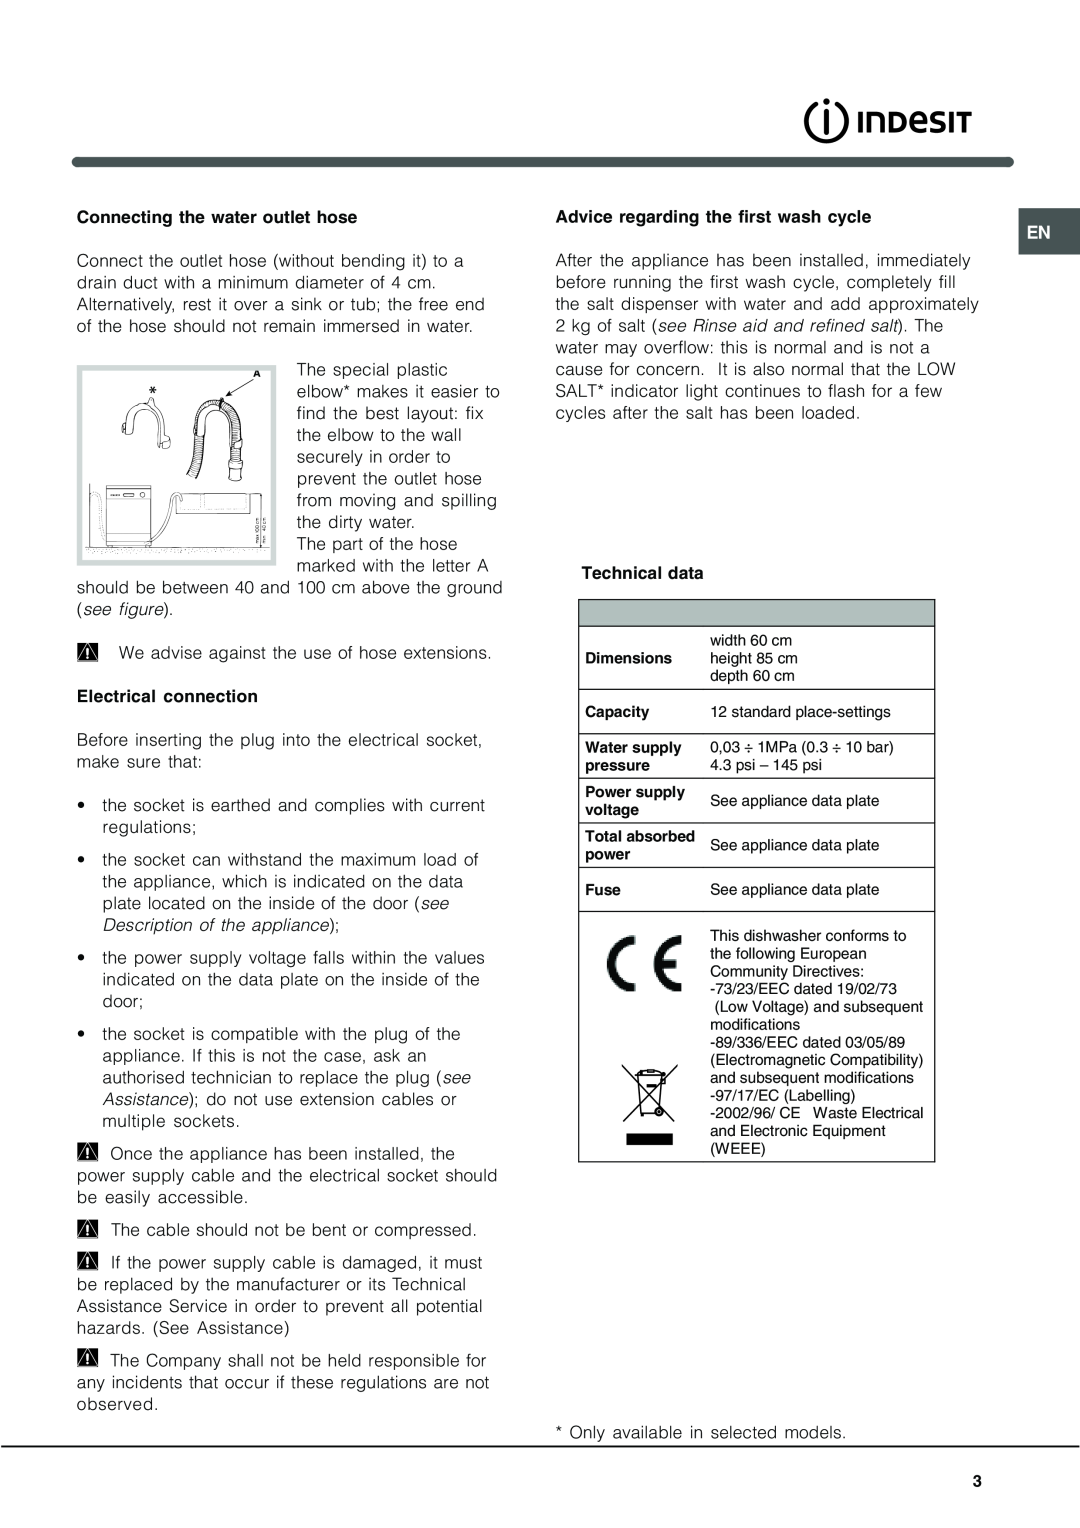 Indesit IDE 750 manual Connecting the water outlet hose, Electrical connection, Advice regarding the first wash cycle 